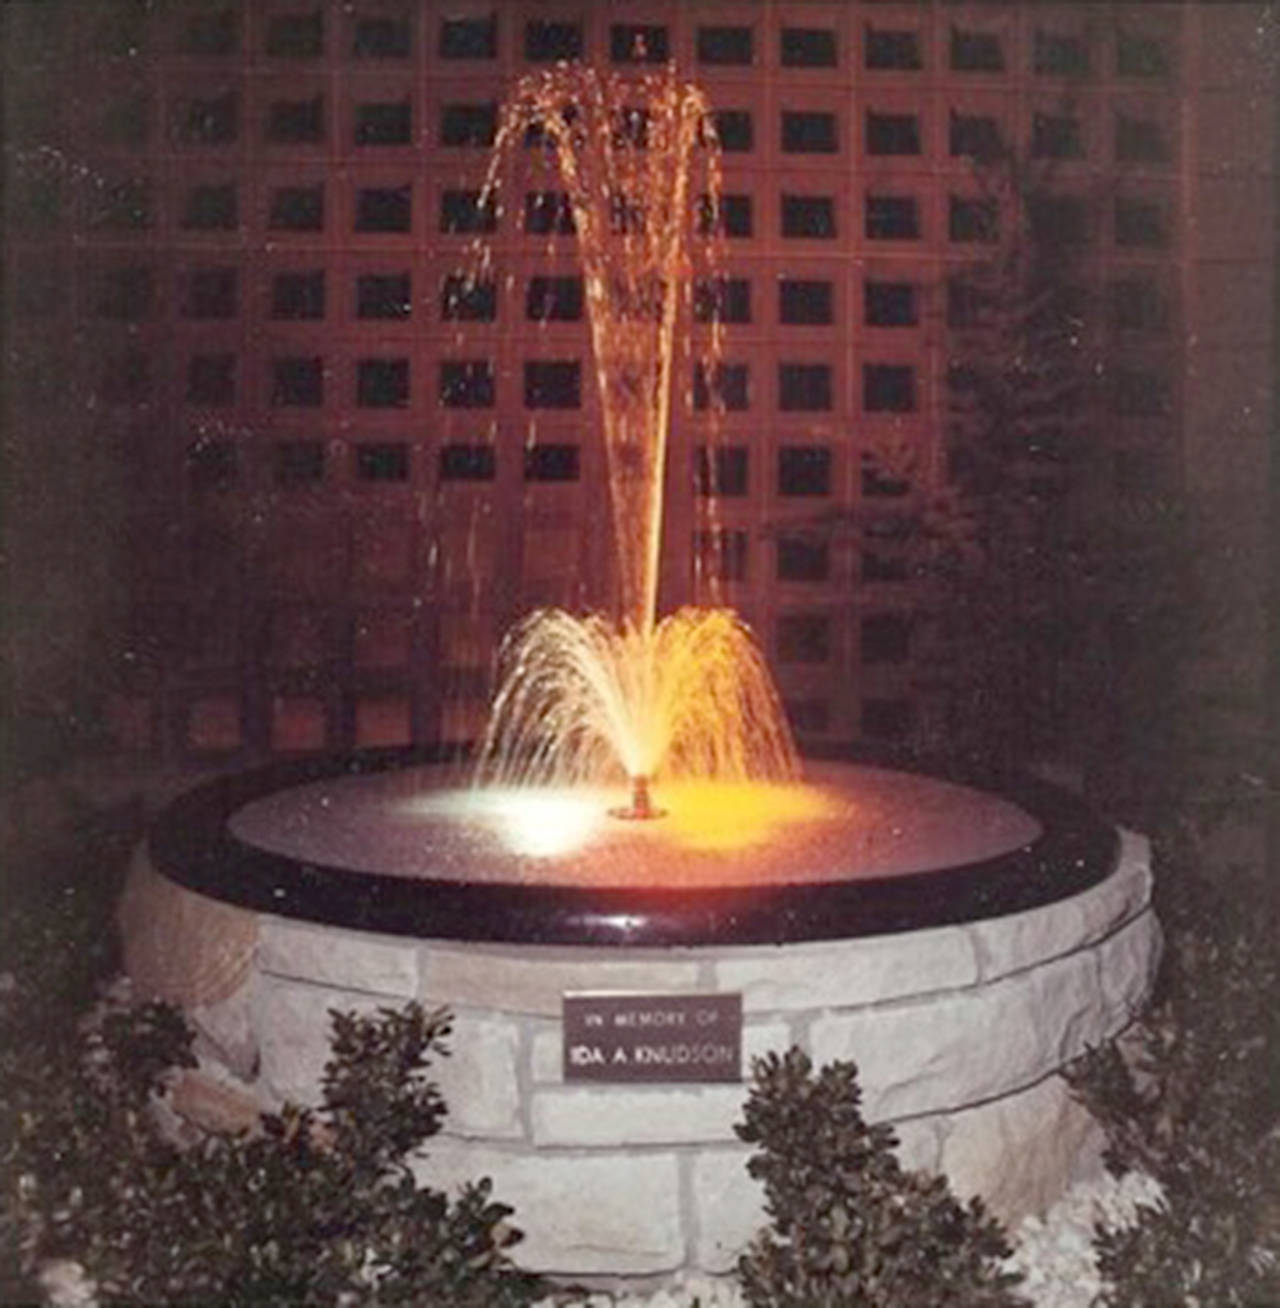 Back in the 1960s, the Ida A. Knudson fountain graced the front of Poulsbo’s old city hall across on Jensen Way. It sent up sprays of water with lights that made the droplets change color at night. (Poulsbo Historical Society)